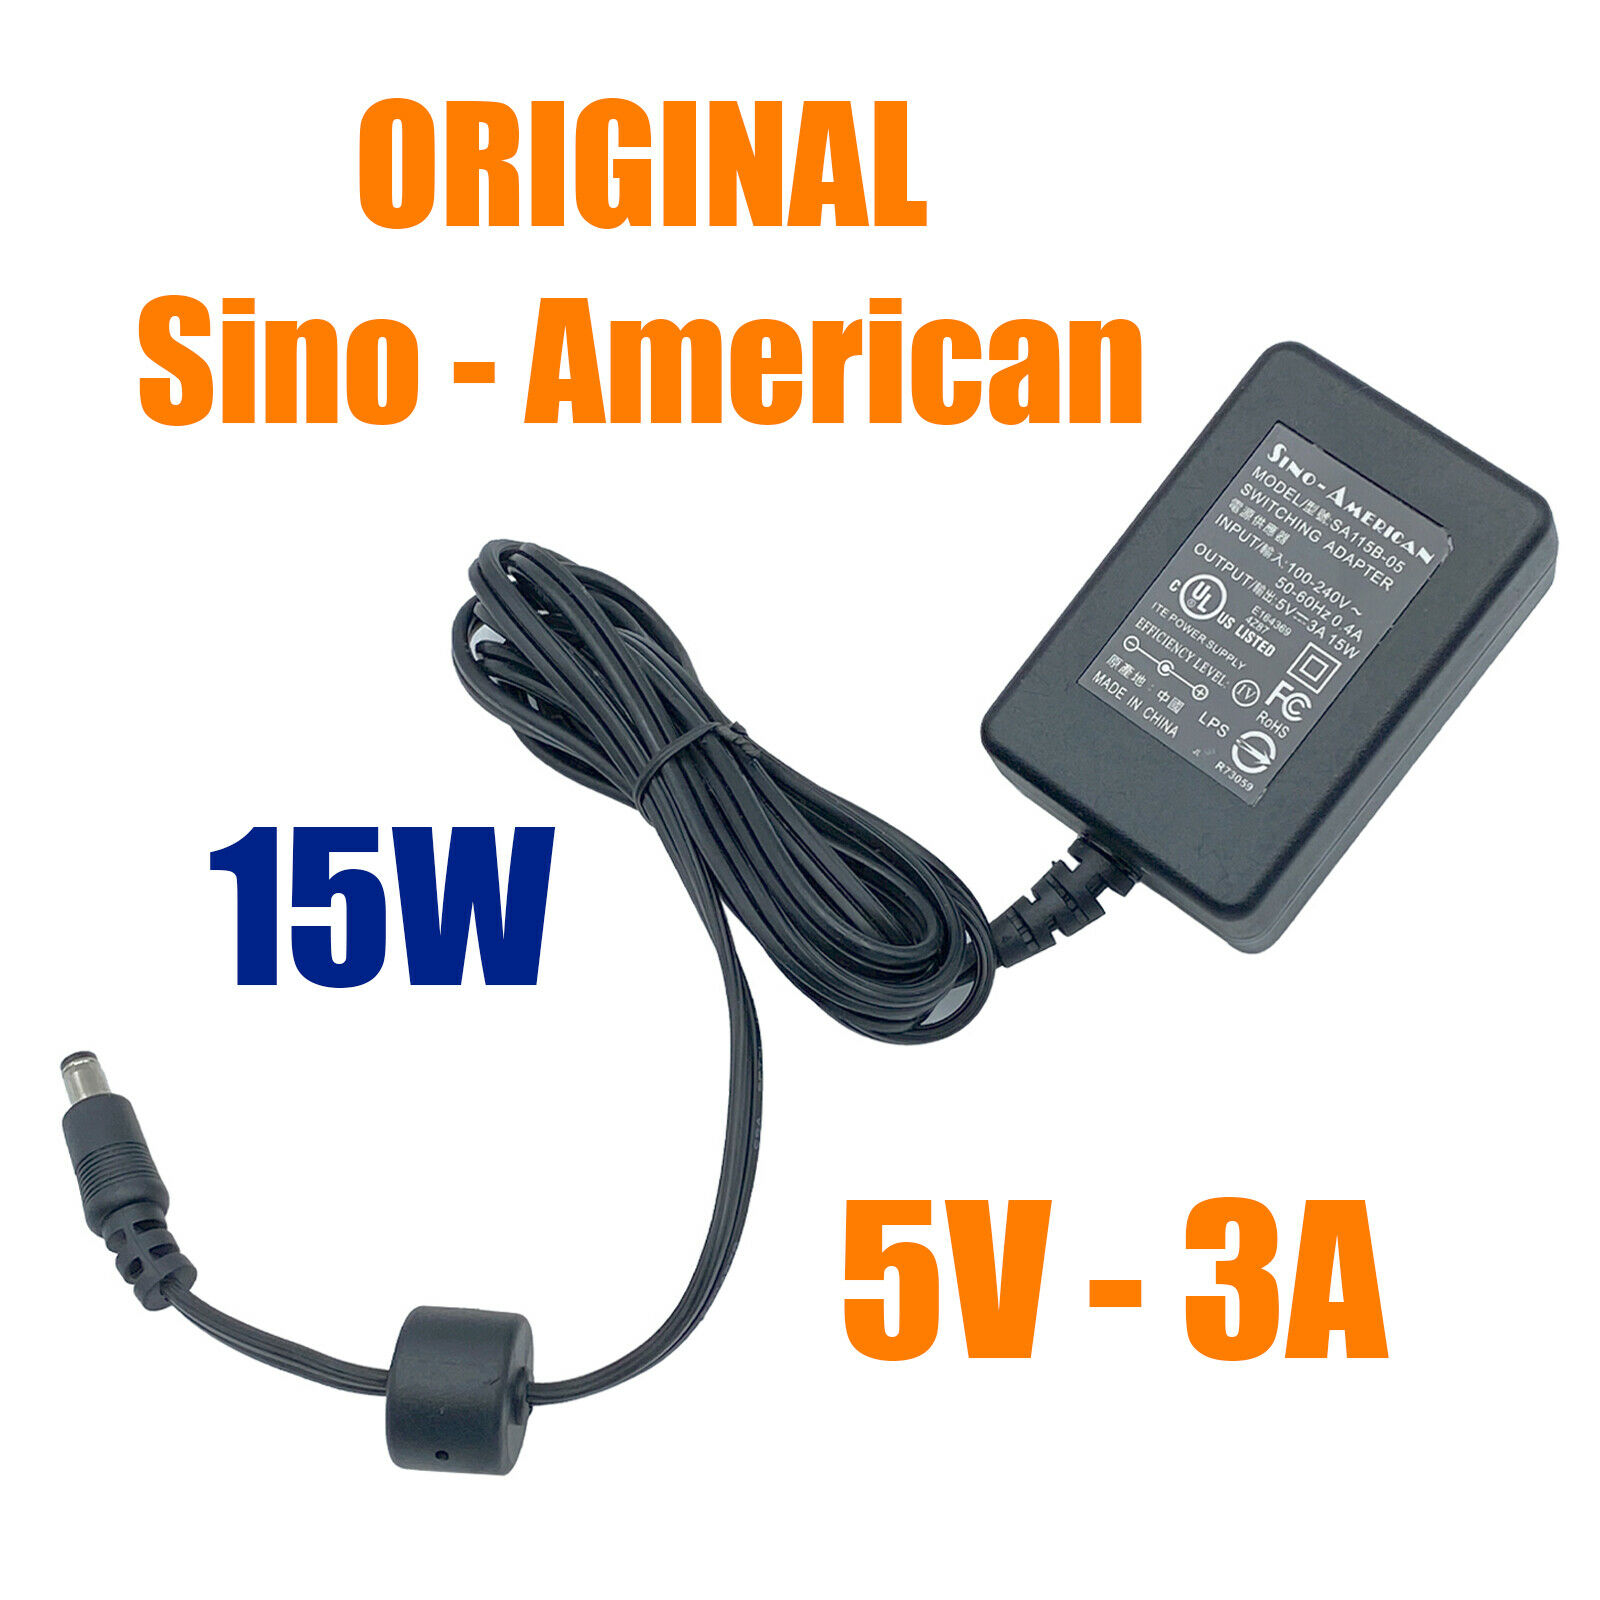 Genuine Sino-American SA115B-05 Switching Adapter 5V 3A 15W Power Supply Product Type: Transformer Type: AC/AC Adapter